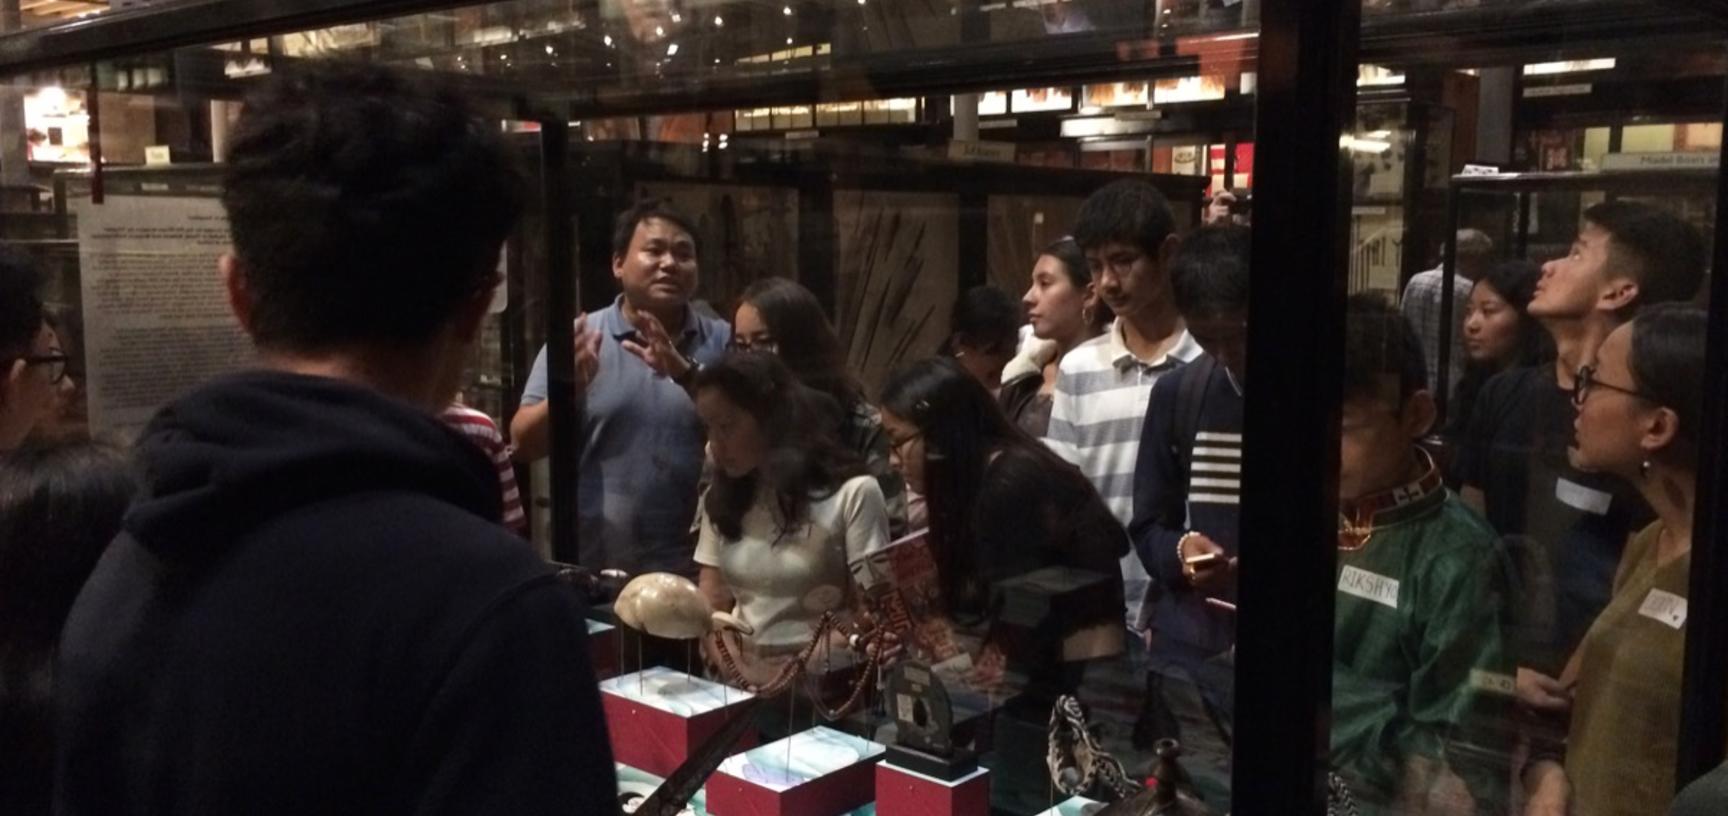 Thupten Kelsang discussing the display with teenage members of the UK’s Tibetan community during a public engagement event, ‘My Tibet Museum’, held at the Pitt Rivers Museum in October 2018.